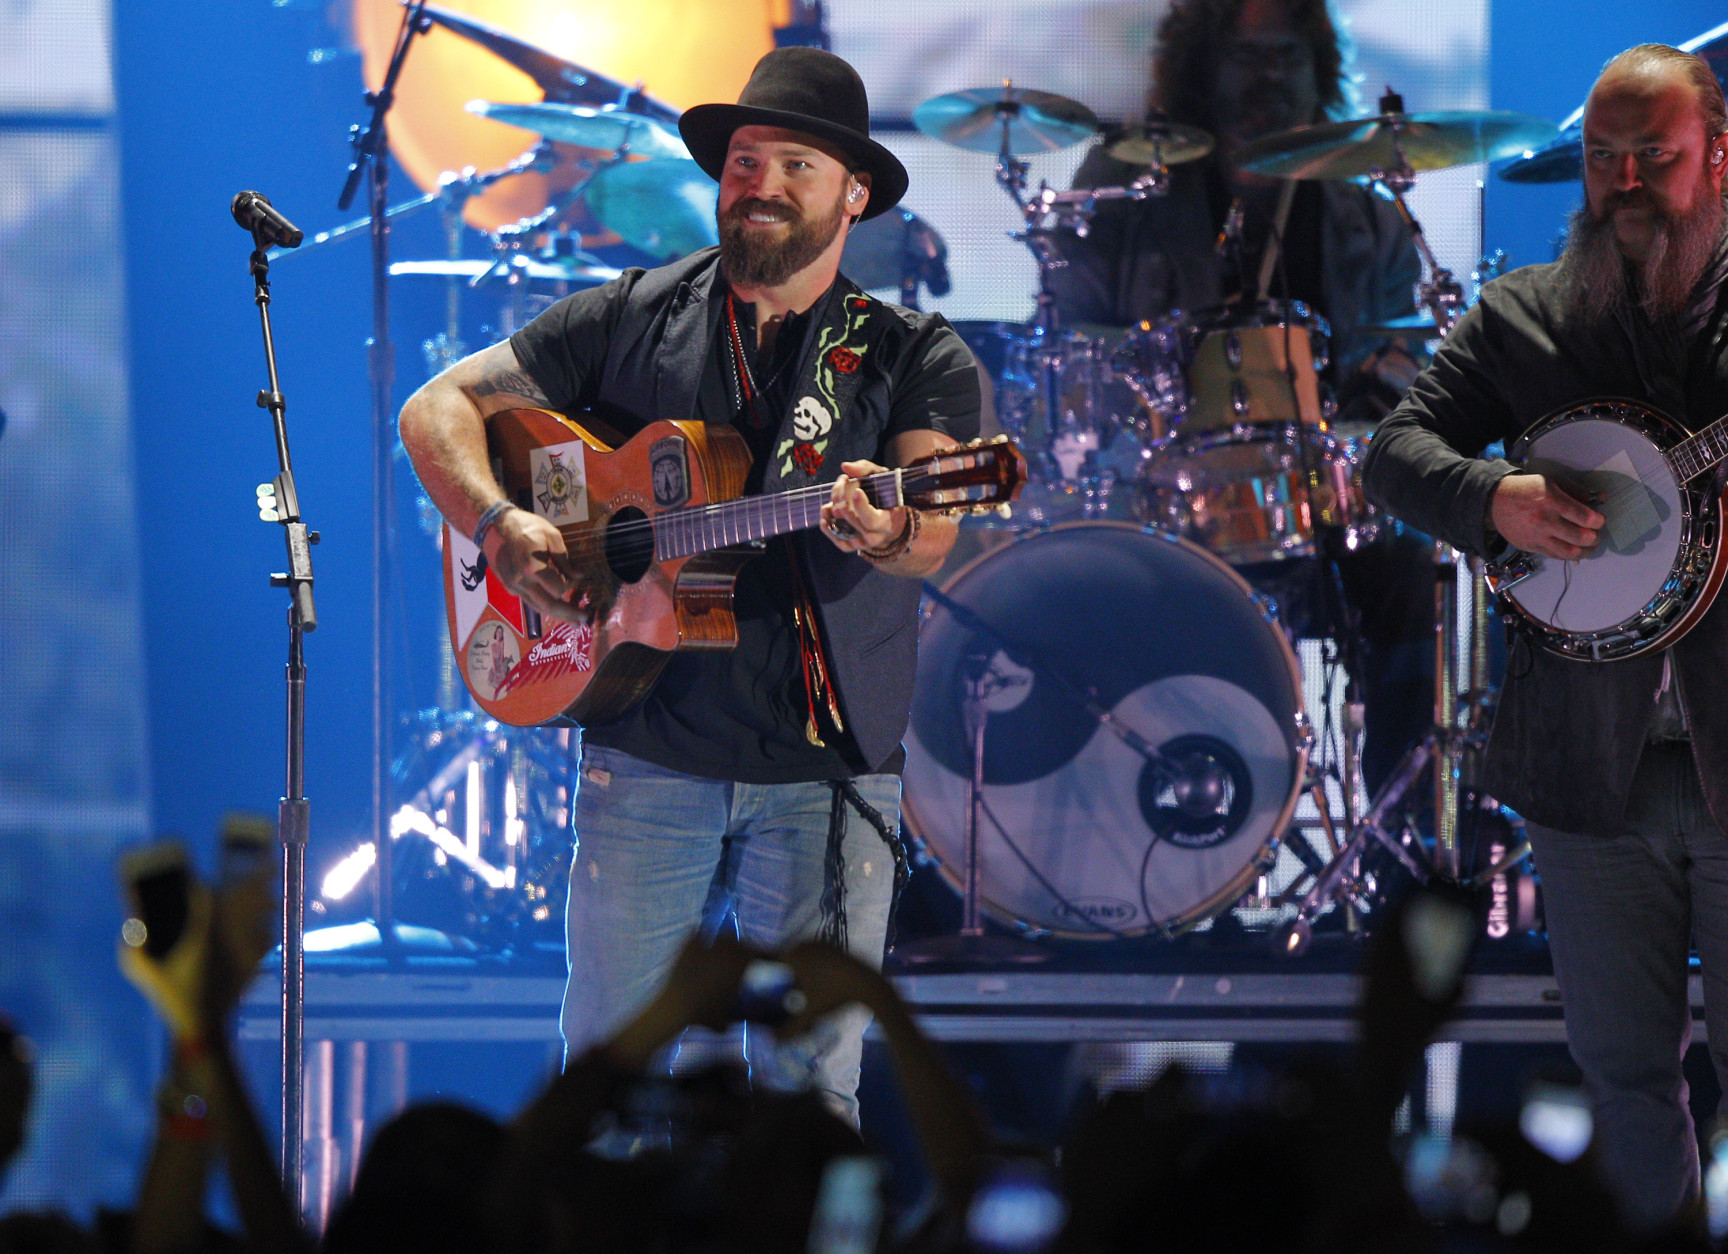 Zac Brown, of Zac Brown Band, performs at the CMT Music Awards at Bridgestone Arena on Wednesday, June 10, 2015, in Nashville, Tenn. (Photo by Wade Payne/Invision/AP)